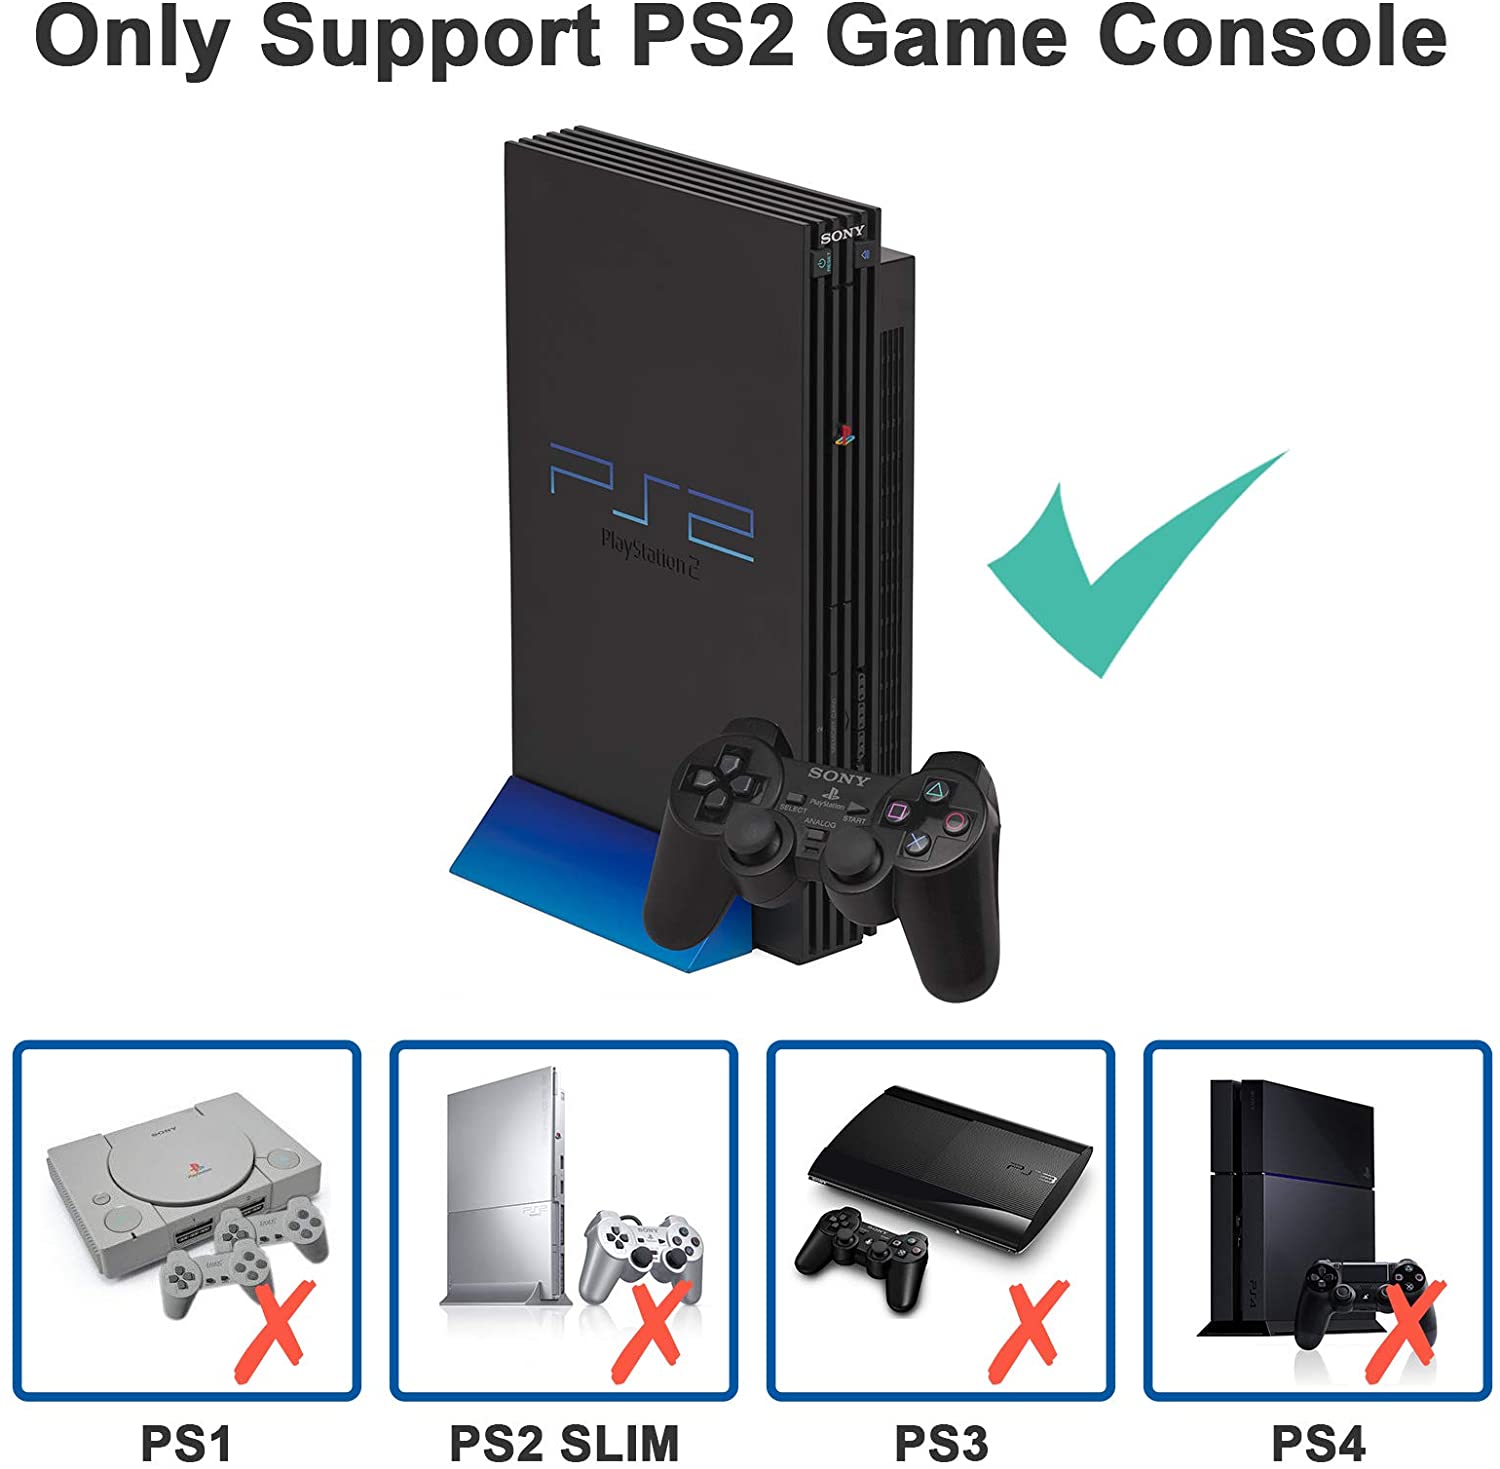 PS2 to HDMI Converter Adapter, Video Converter PS2 to HDMI